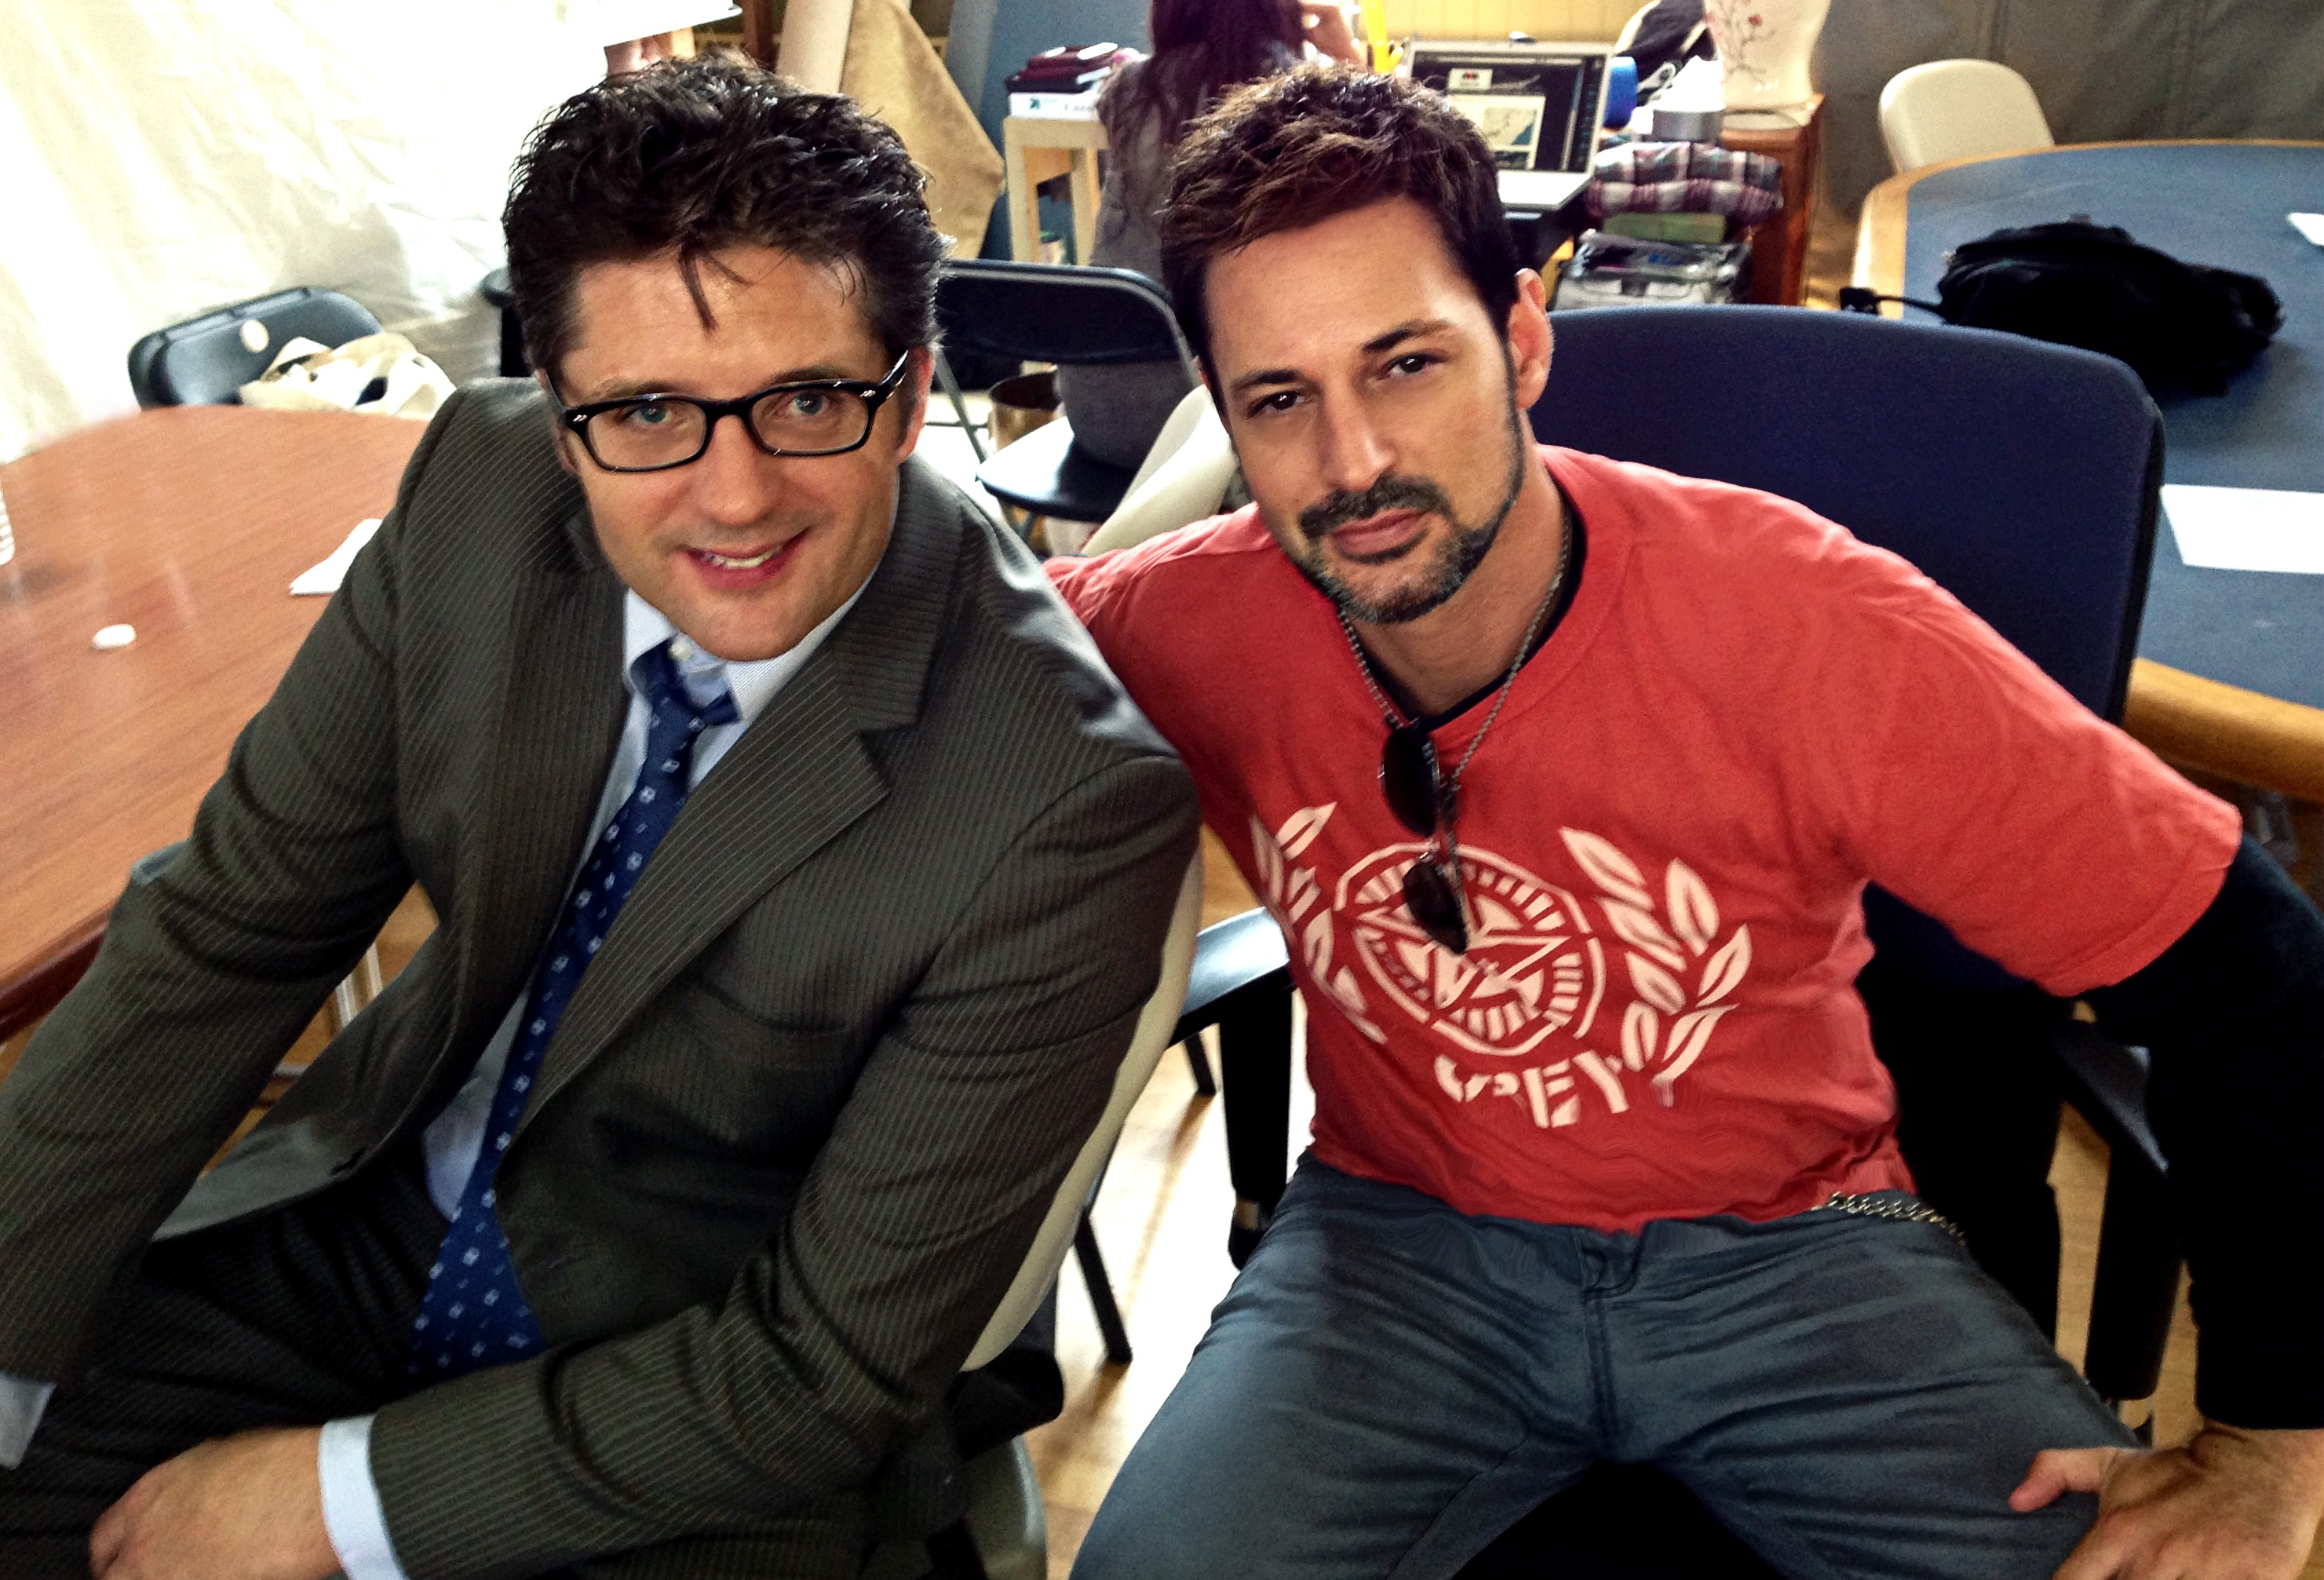 Producer David Gere & actor Michael Eck on the set of 'A Bet's A Bet' (2013)